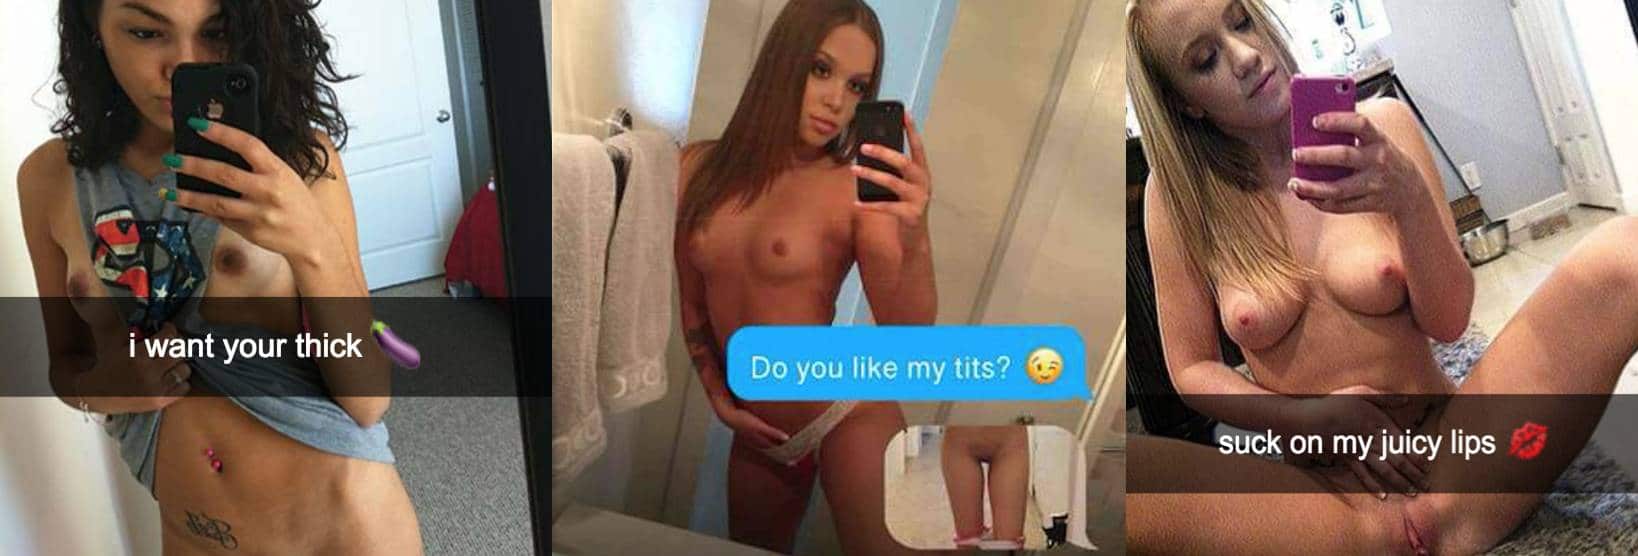 Naked Girls Sexting - Top 10 Sexting Online Websites & Apps For Horny Singles